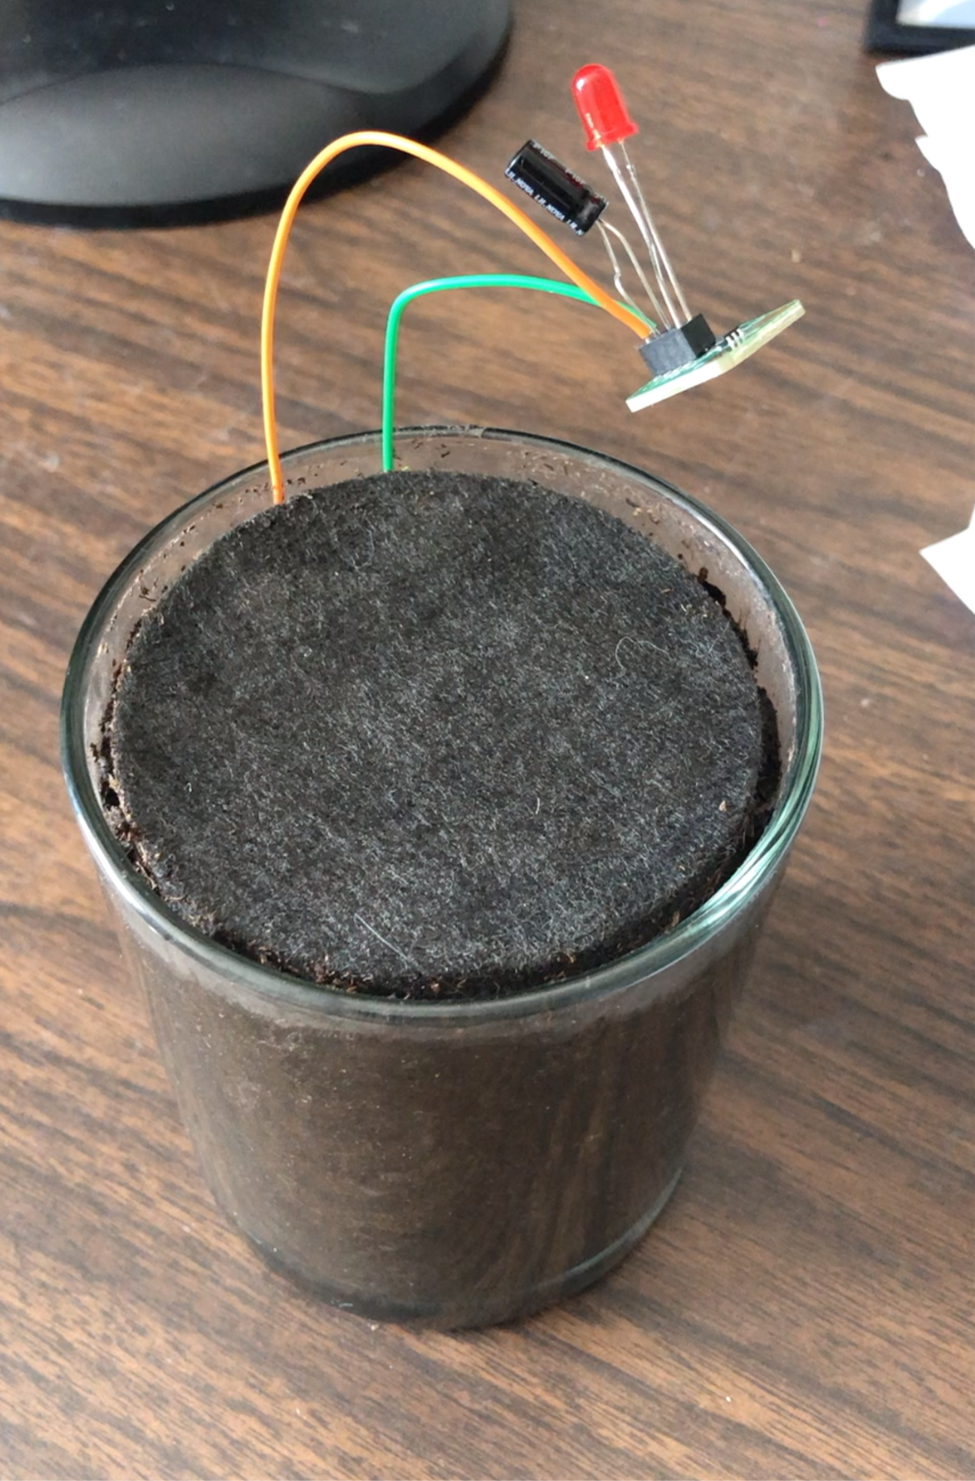 An image of soil in a small glass vase with wires and a blinker LED board coming out of it.